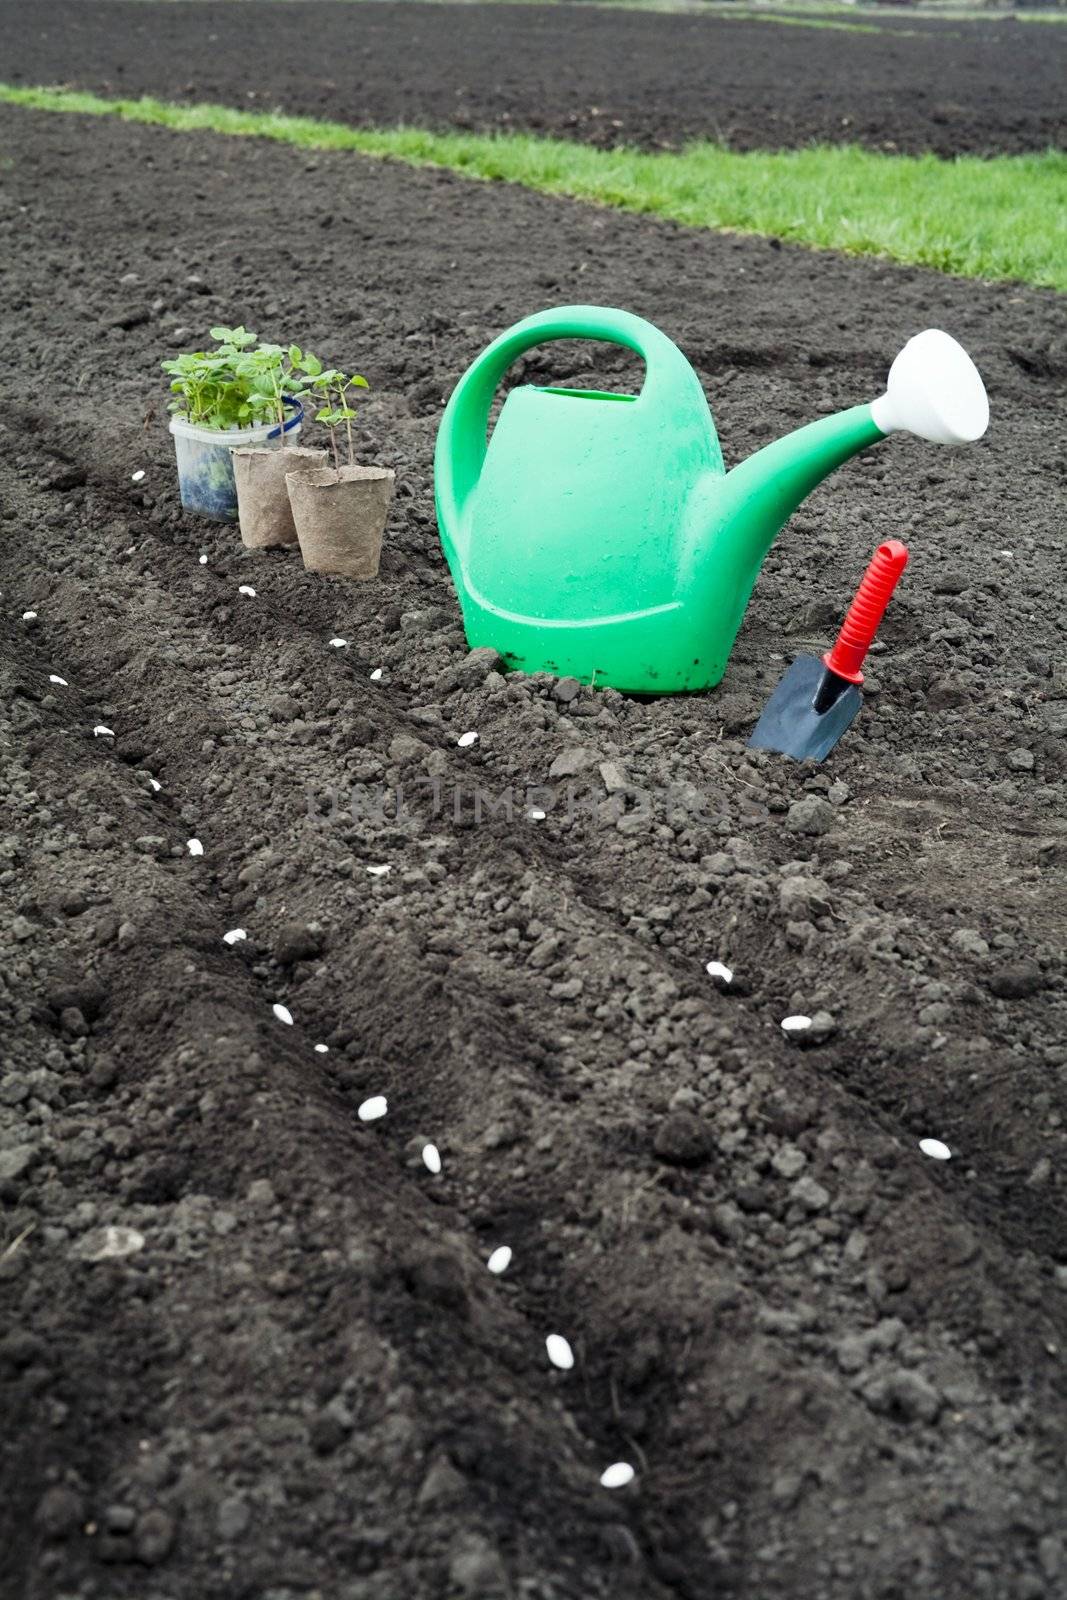 An image of green plants and watering can